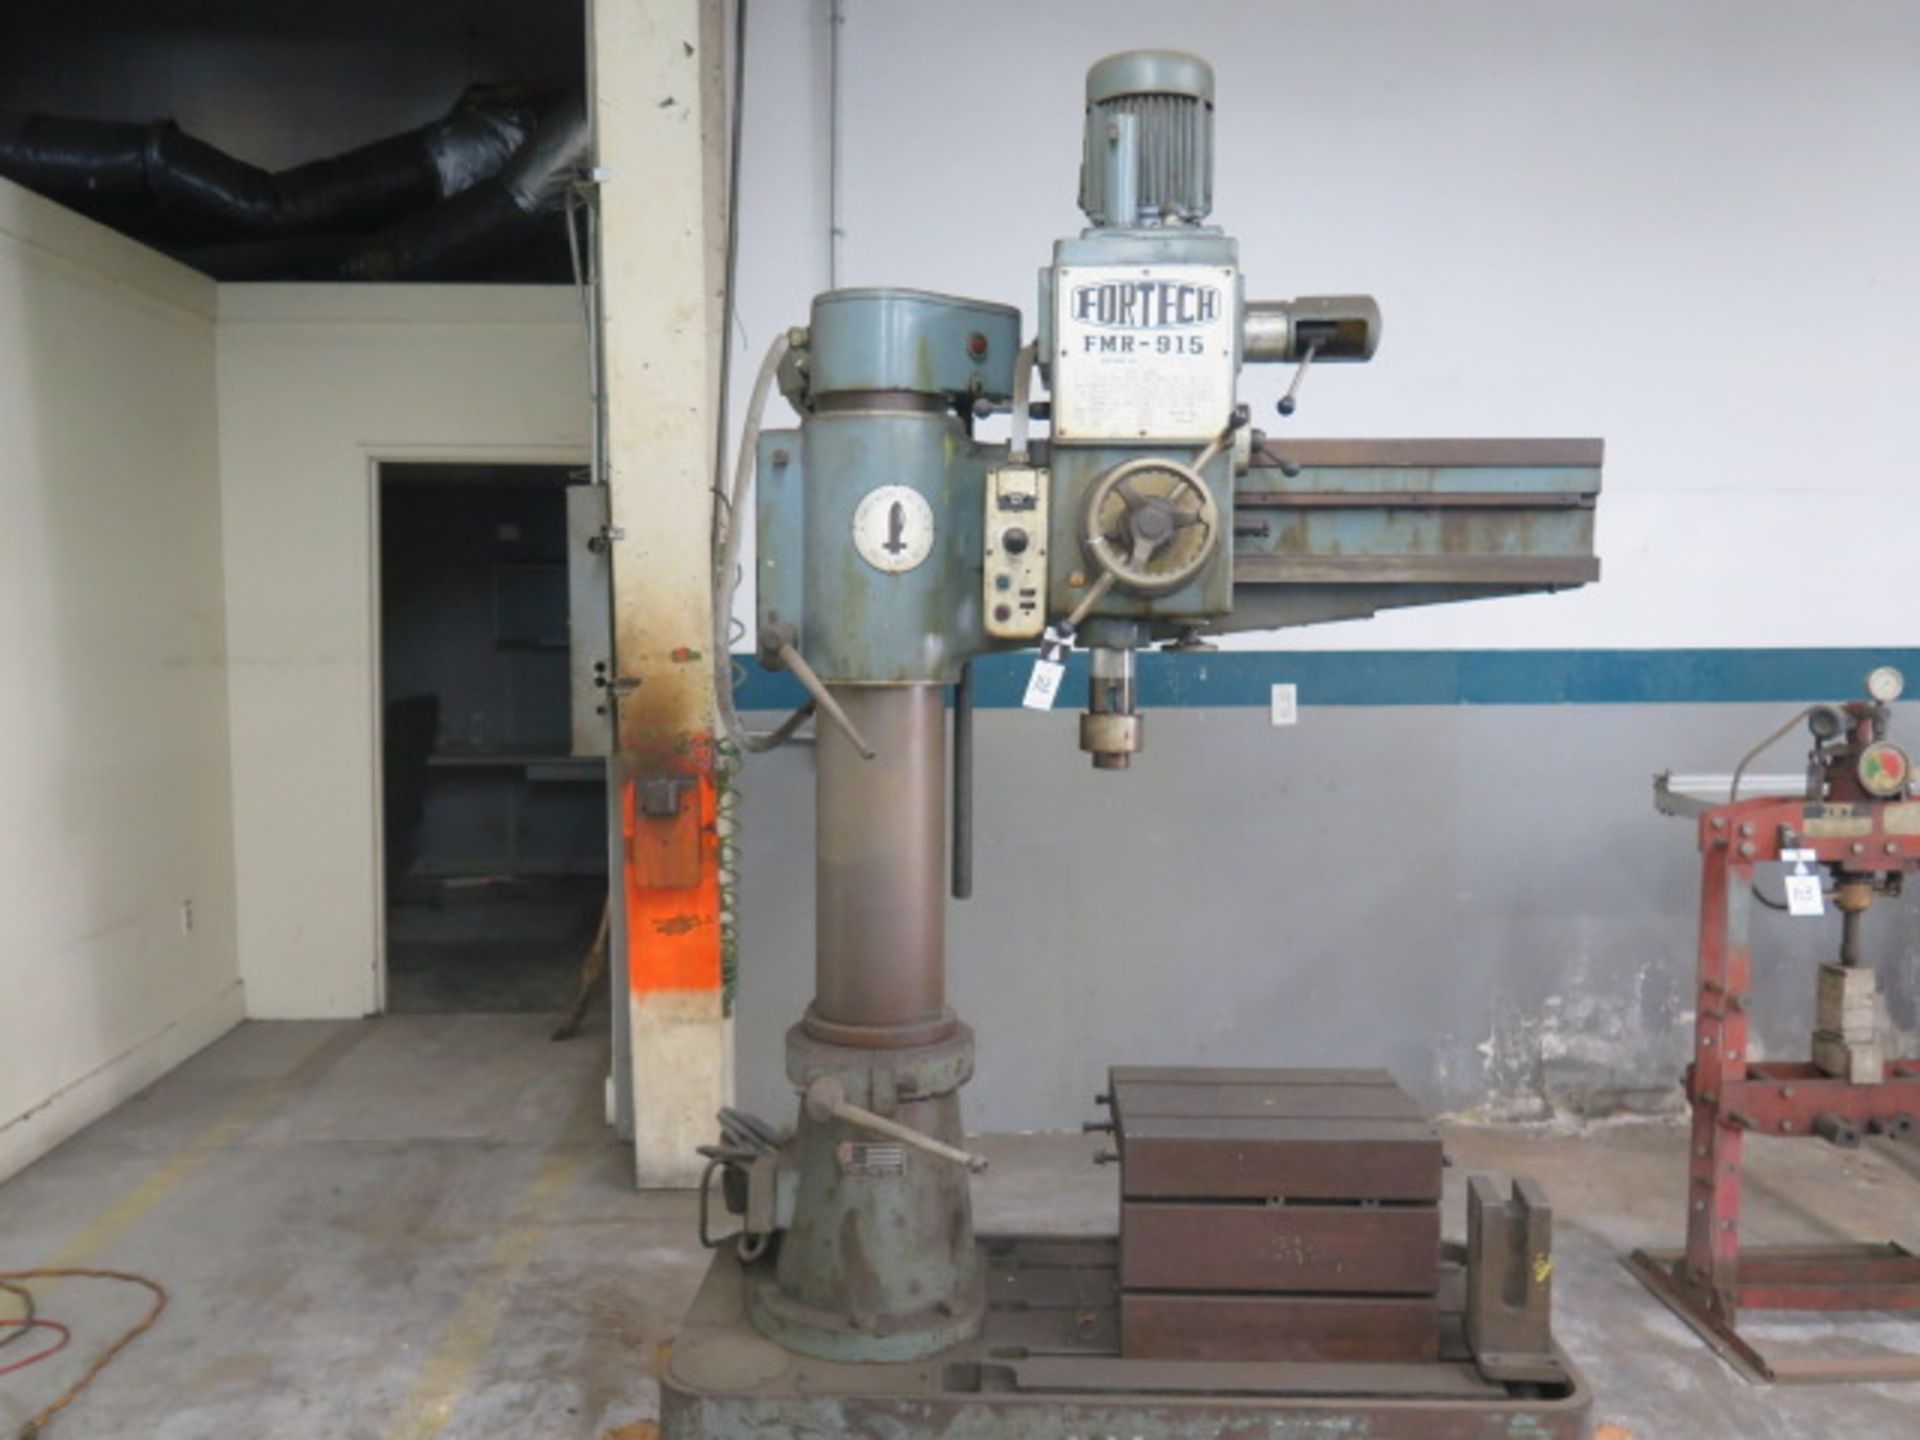 Fortech FMR-915 8” Column x 24” Radial Arm Drill s/n 166 w/ 50-1500 RPM, Power Column and Feeds, 21”